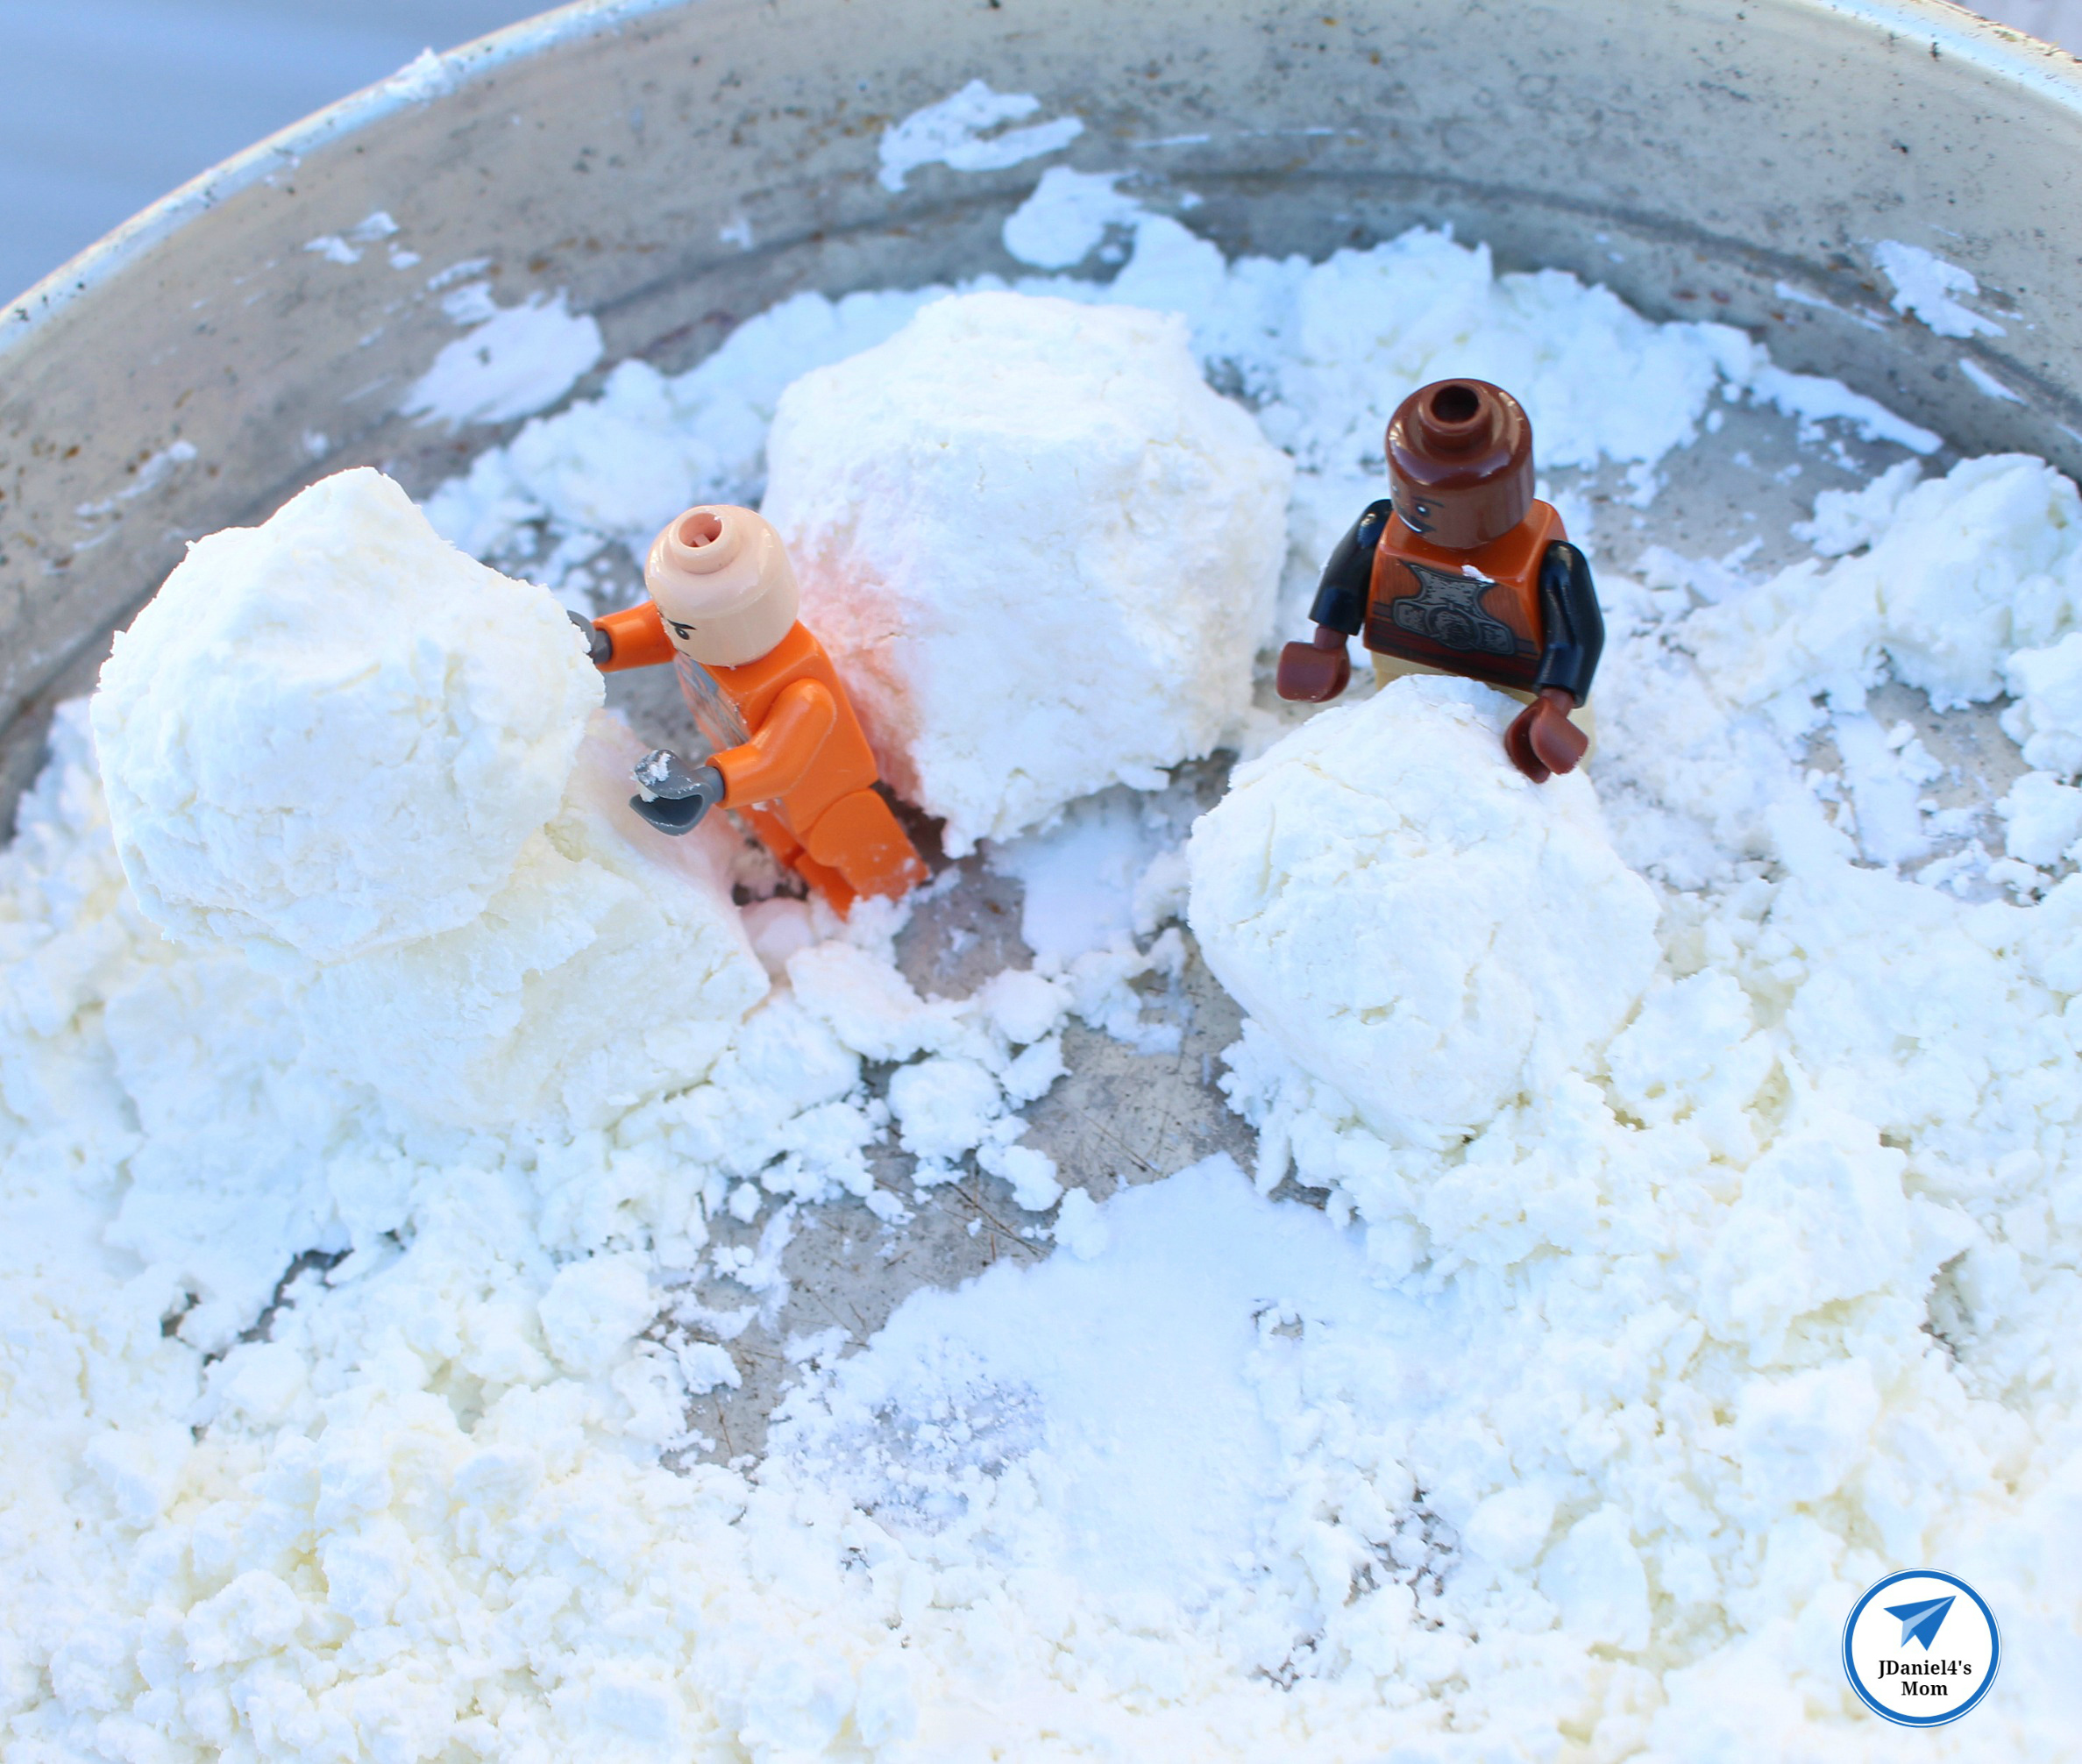 How to Make Fake Snow Recipes with Cornstarch Activities and Printable Algorithm Activities - One of the activities is to build snowballs.